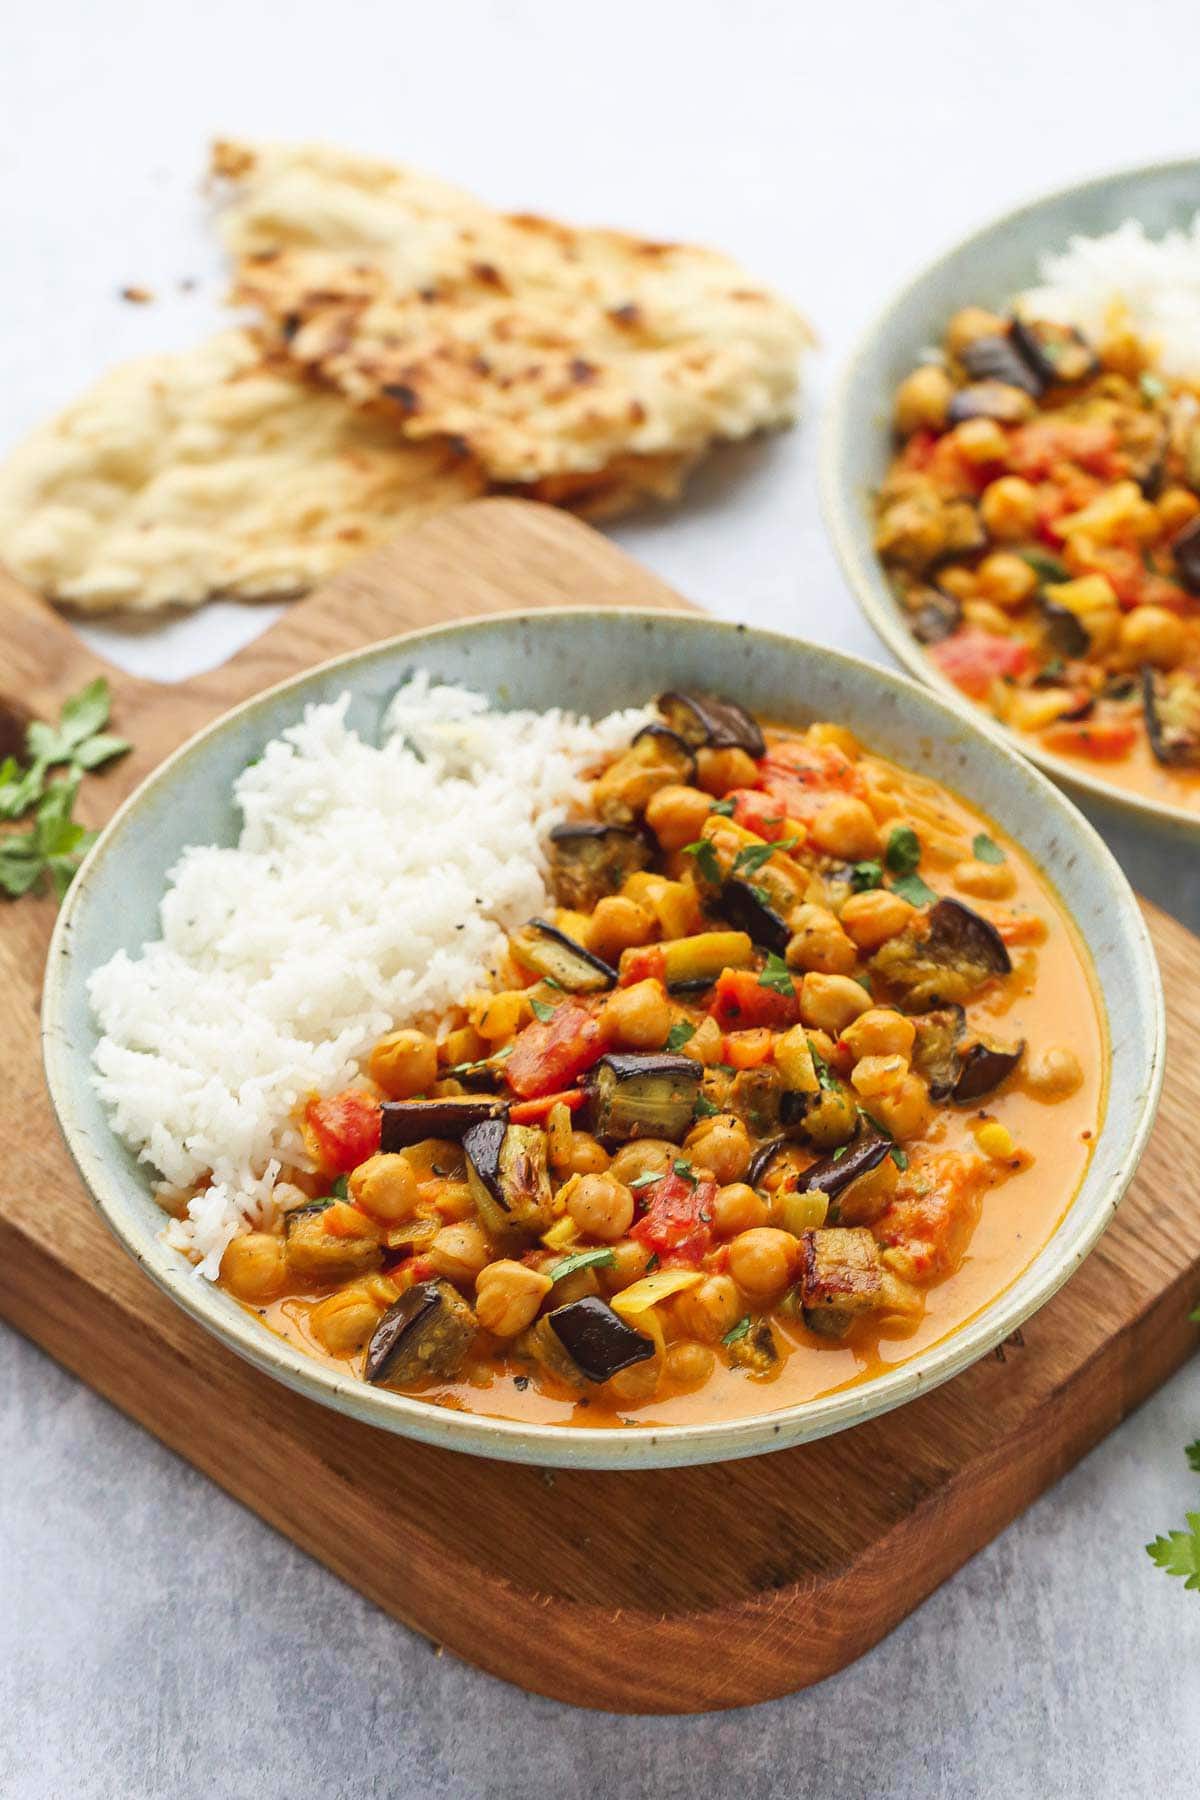 A bowl of Aubergine and Chickpea Curry served with white basmati rice over a wooden board.